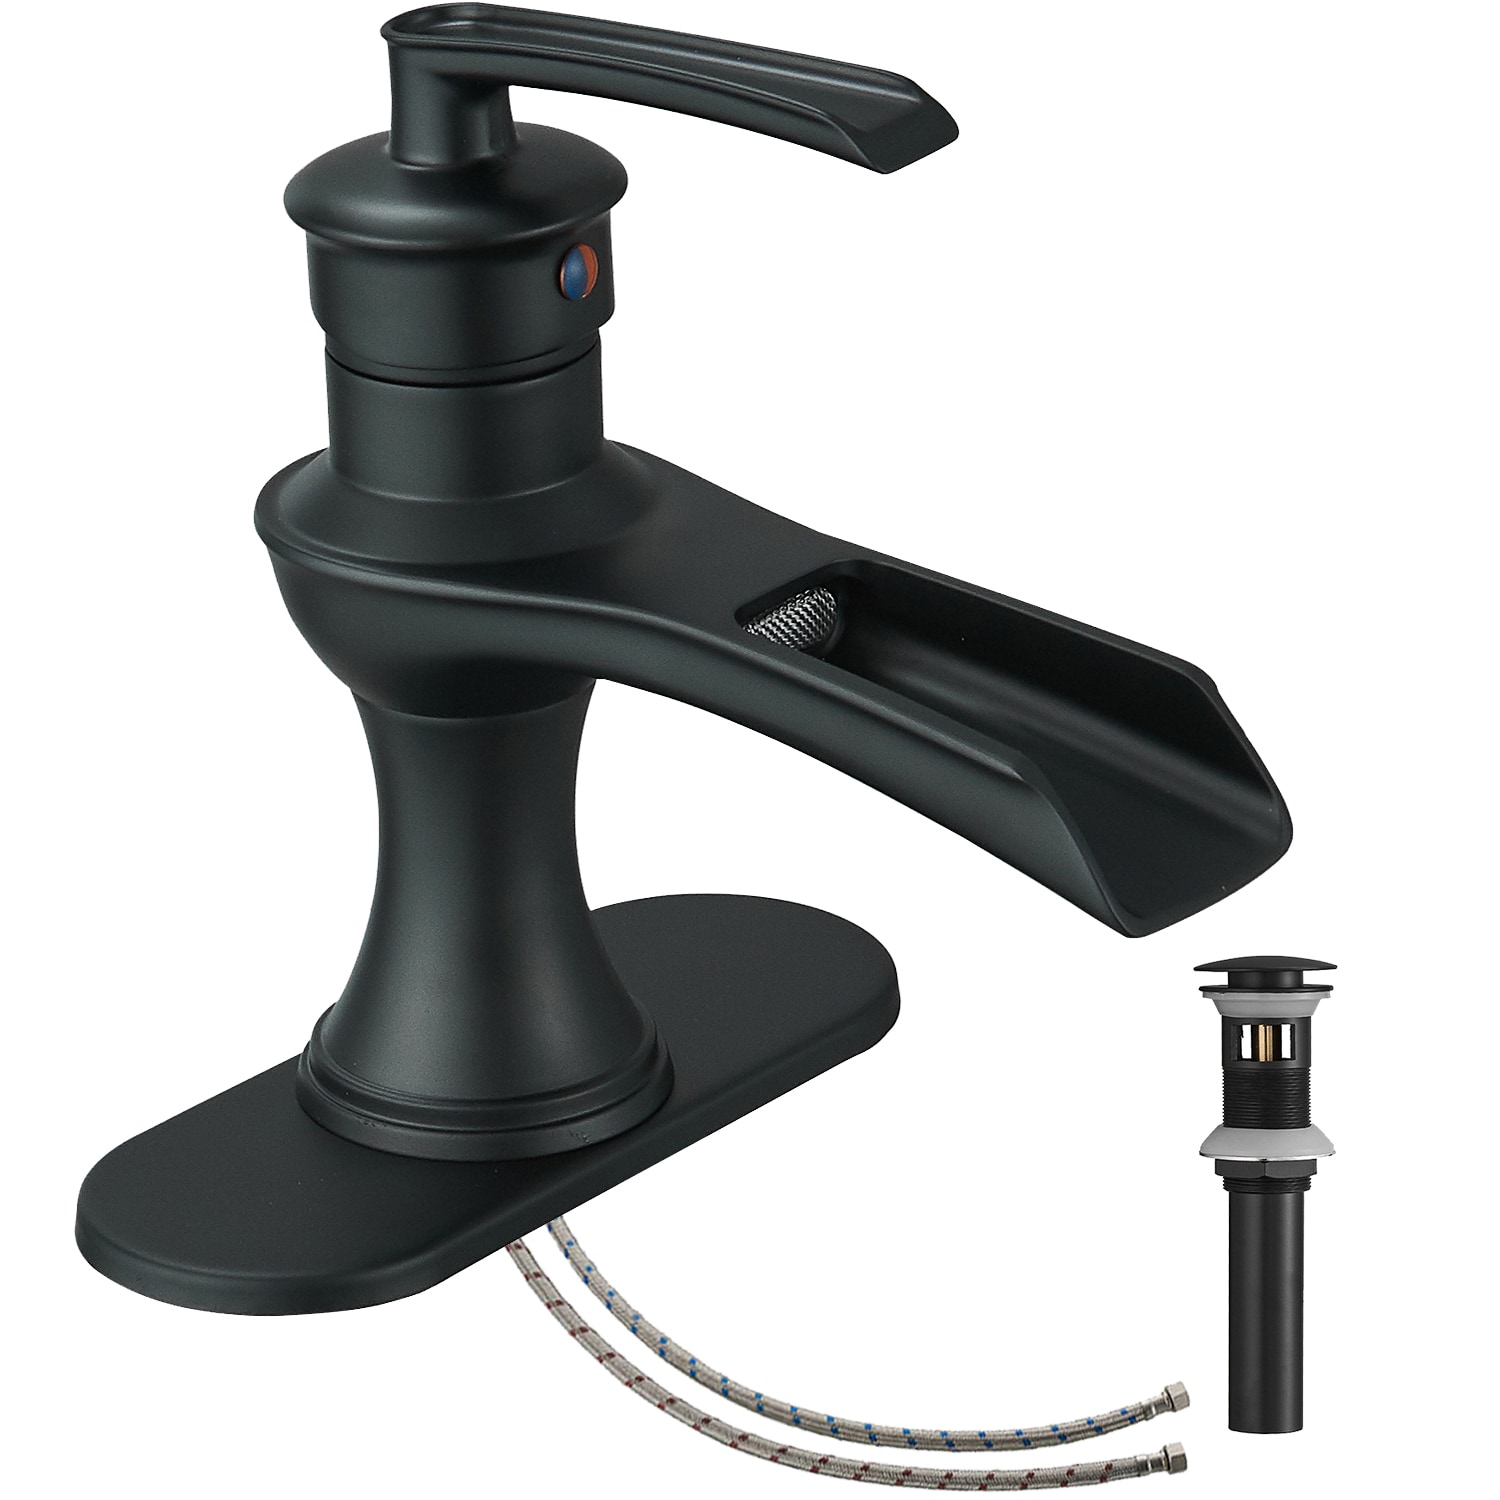 BWE A-96571 Single Hole bathroom faucet Matte Black Single Hole 1-Handle Waterfall Bathroom Sink Faucet with Drain and Deck Plate